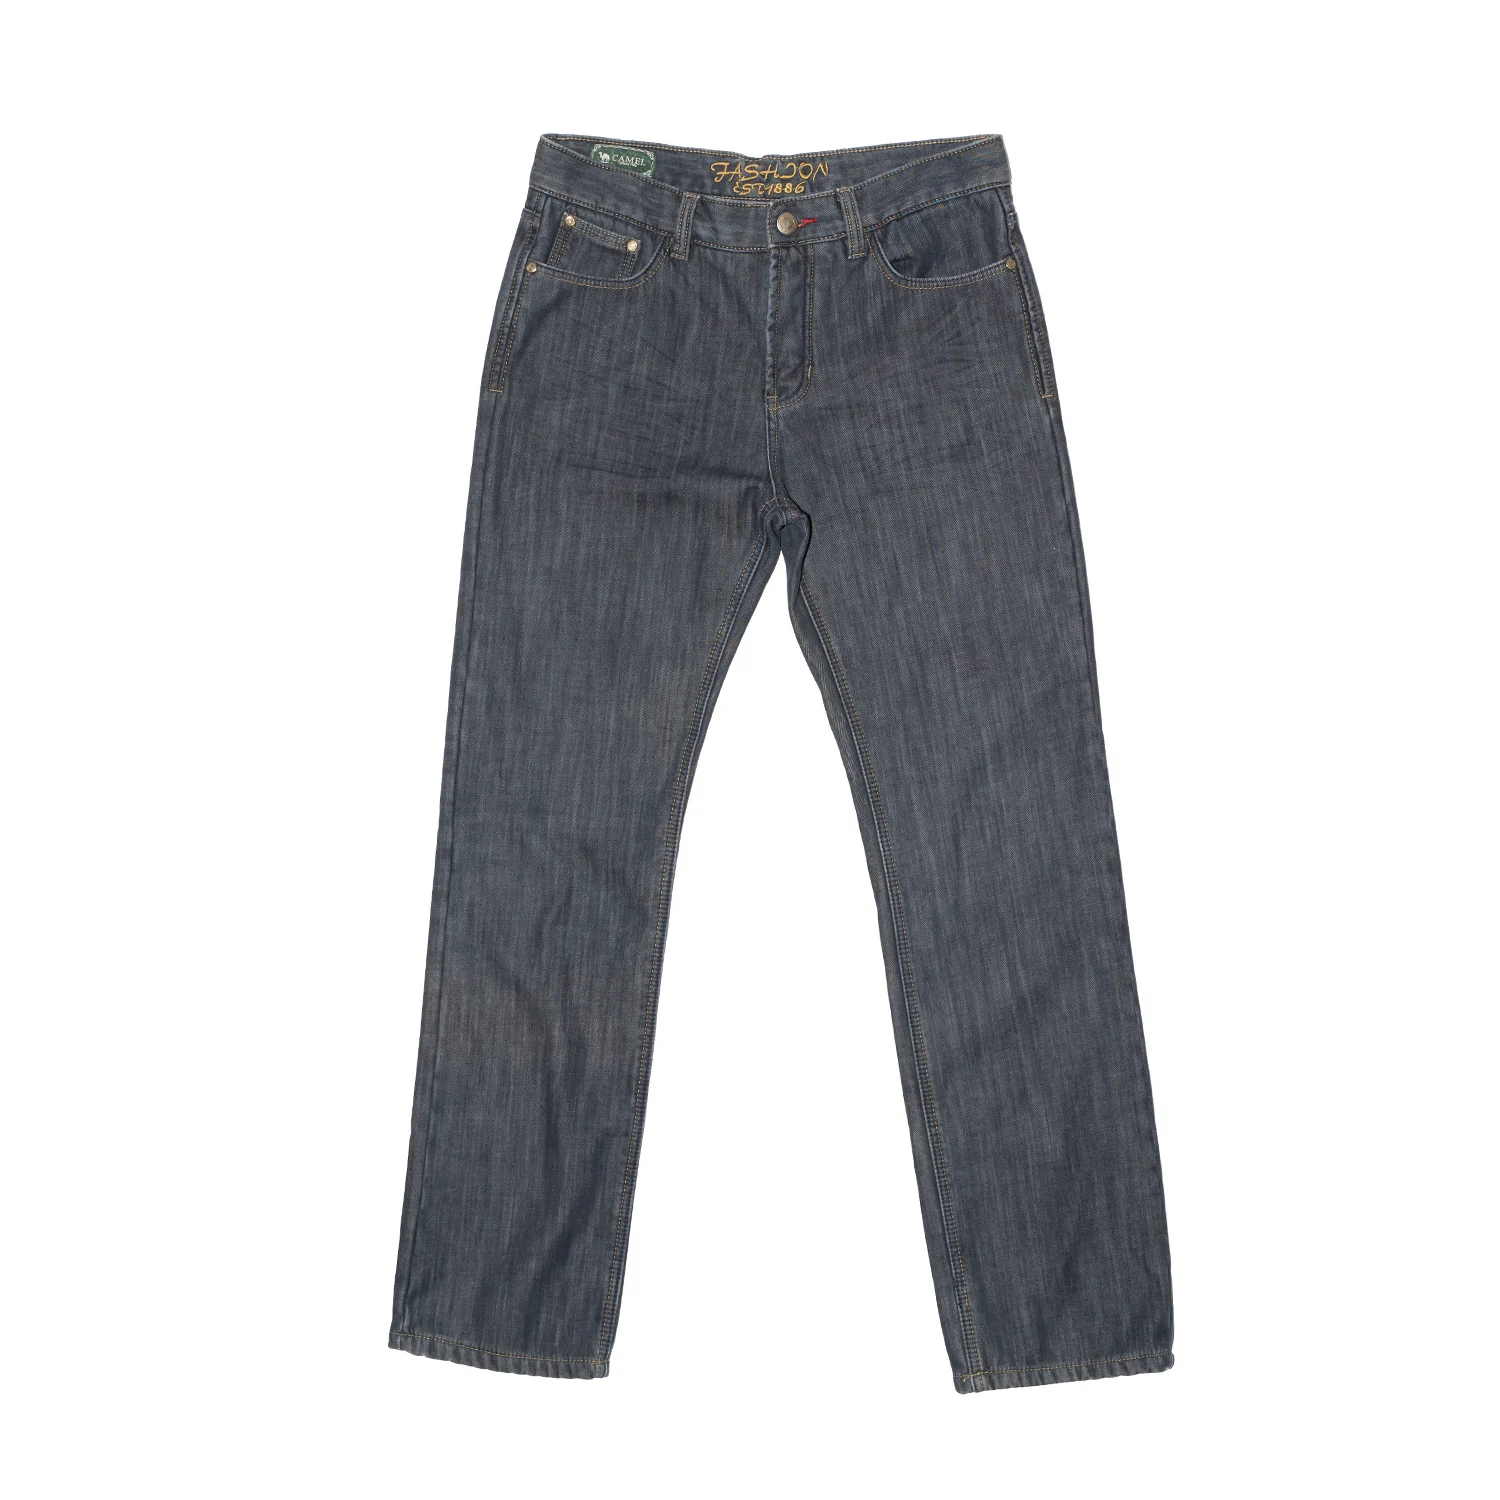 

Second Hand Used Men Jeans Pants Wholesale T-shirt Bales New York Asia Japan India BSG Used clothes, Mix color